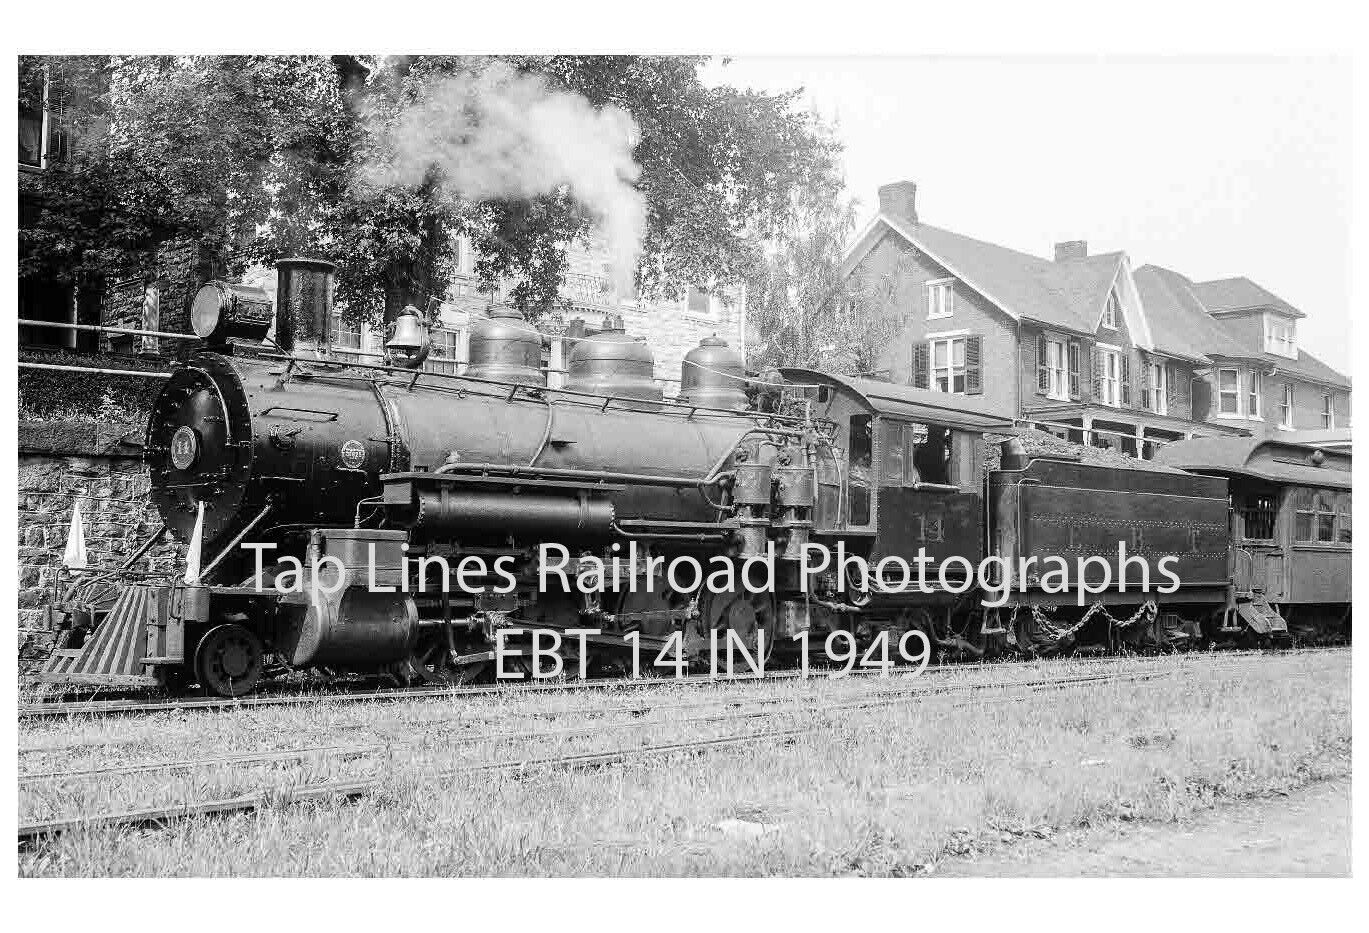 EAST BROAD TOP EBT 14 MT UNION PA AT DEPOT ON JULY 31 1949 - NEW 5X8 PHOTO